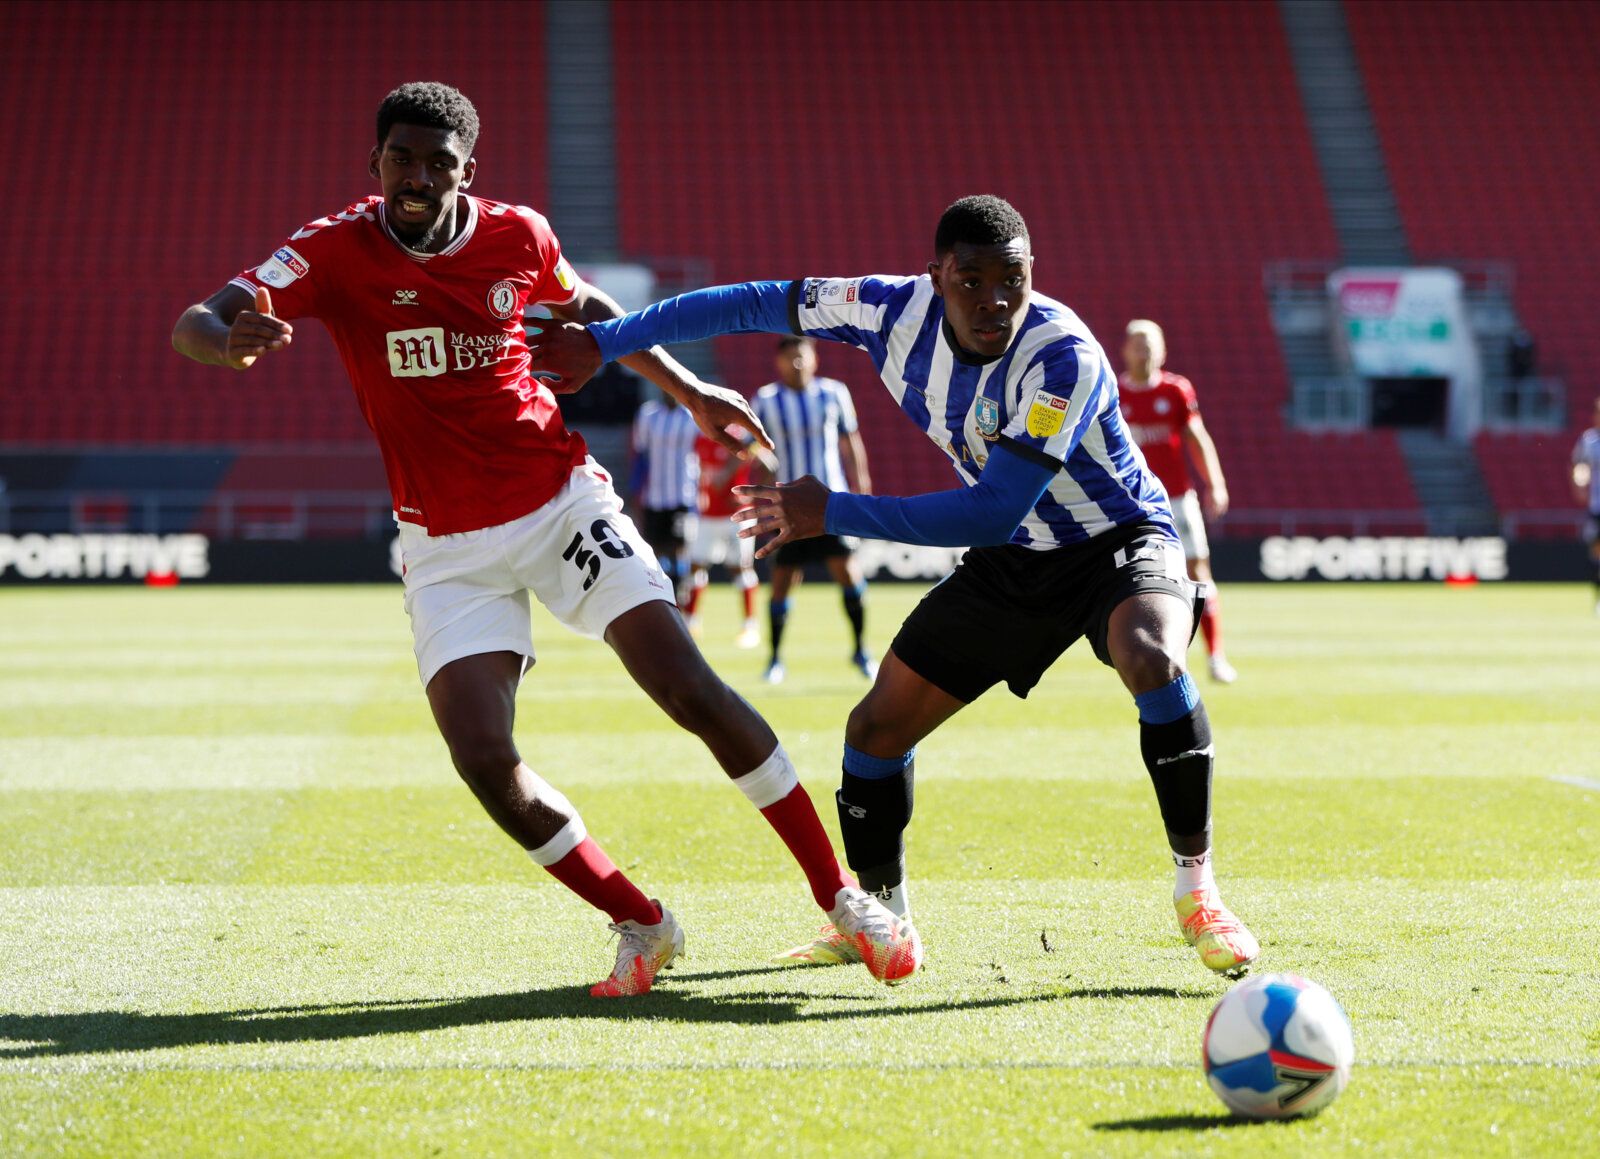 Soccer Football - Championship - Bristol City v Sheffield Wednesday - Ashton Gate Stadium, Bristol, Britain - September 27, 2020  Bristol City's Tyreeq Bakinson in action with Sheffield Wednesday's Fisayo Dele-Bashiru   Action Images/Paul Childs  EDITORIAL USE ONLY. No use with unauthorized audio, video, data, fixture lists, club/league logos or "live" services. Online in-match use limited to 75 images, no video emulation. No use in betting, games or single club/league/player publications.  Plea